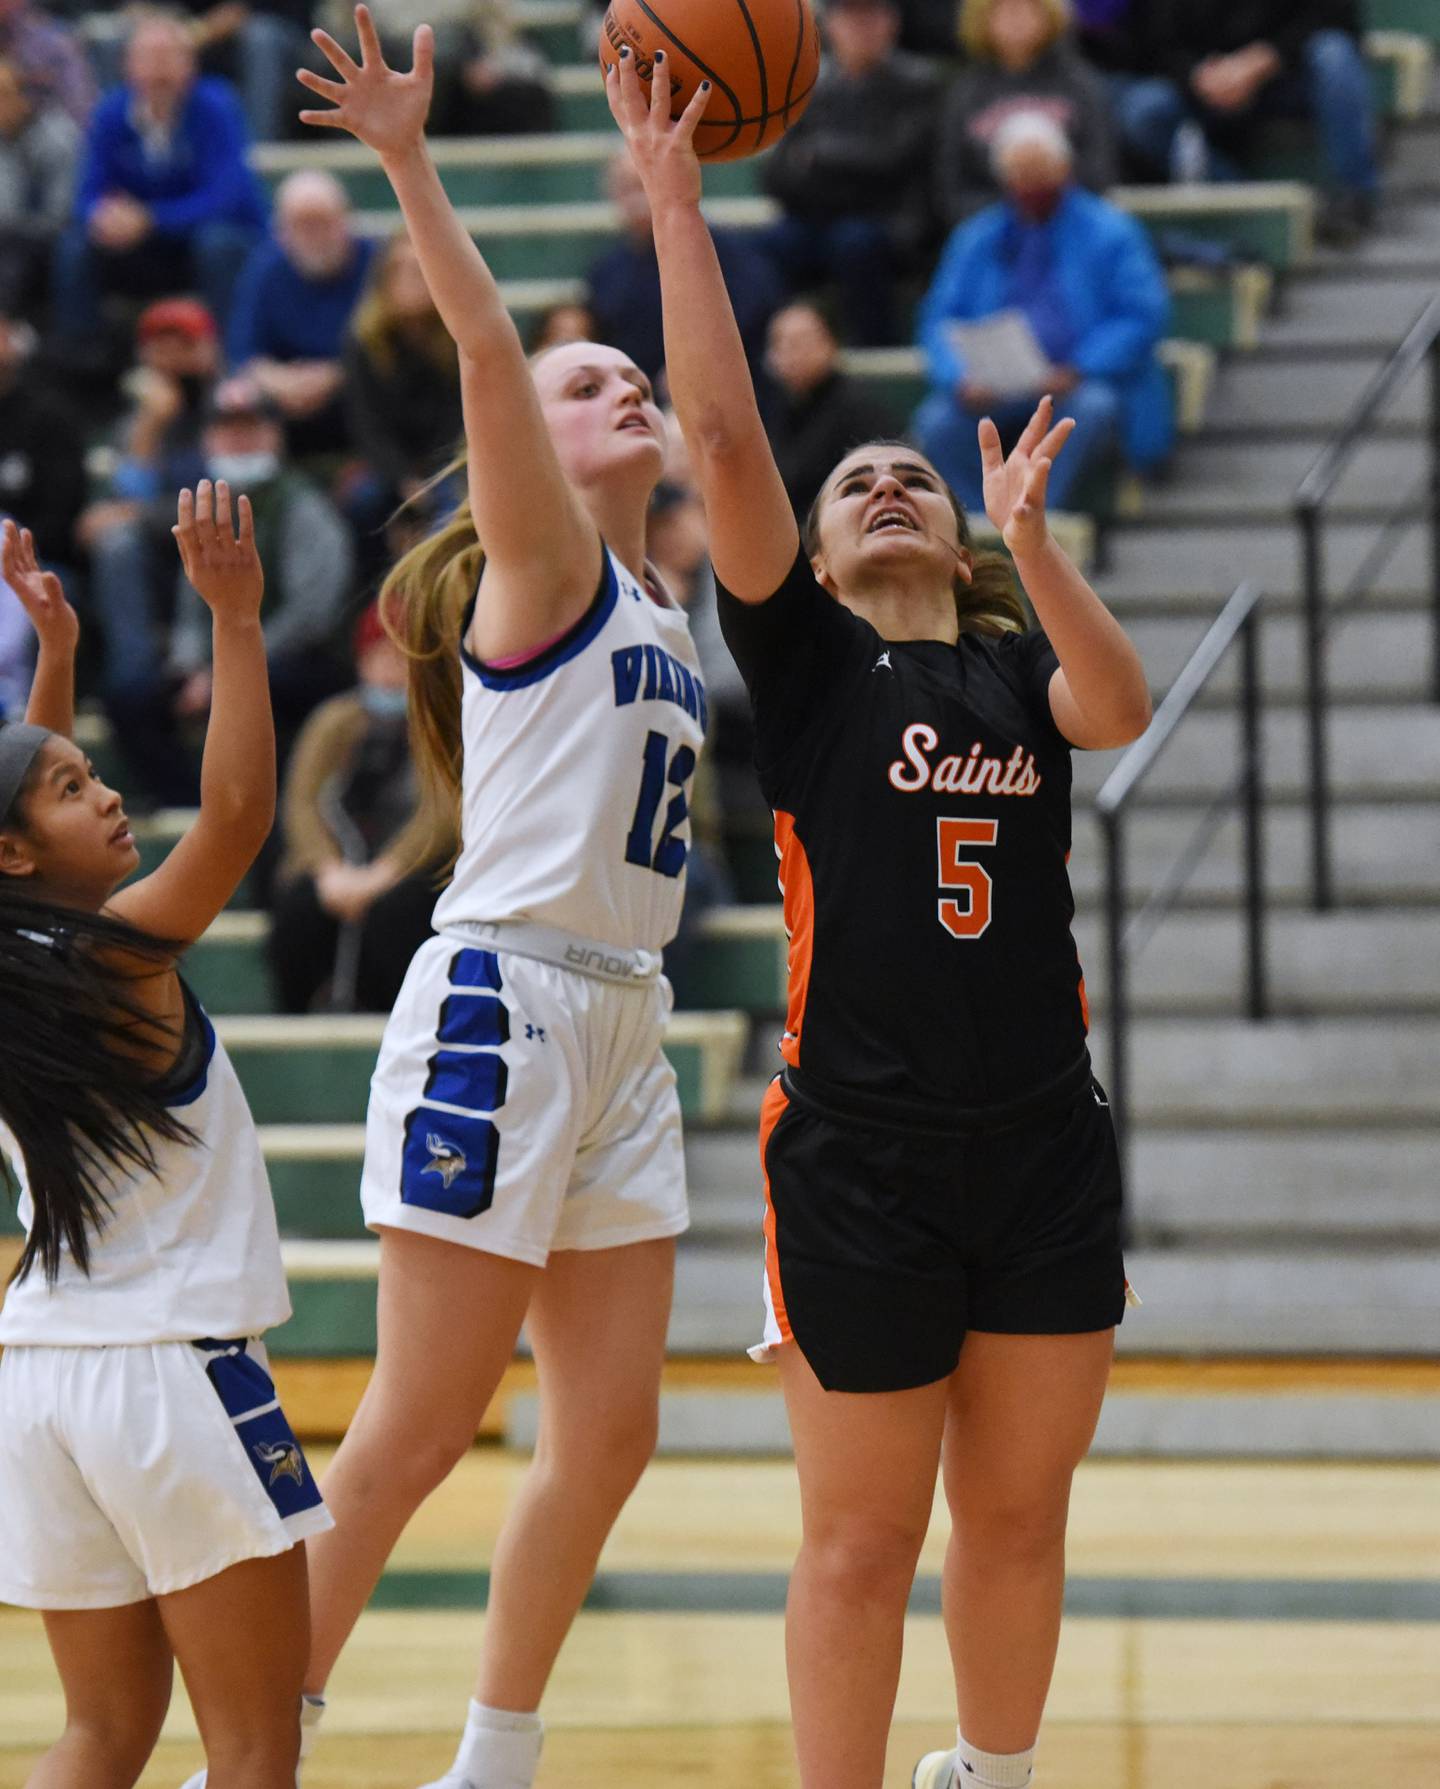 St. Charles East's Lexi Diorio (5) takes a shot past Geneva's Zosia Wrobel during TuesdayÕs Class 4A sectional semifinal girls basketball game in Bartlett.